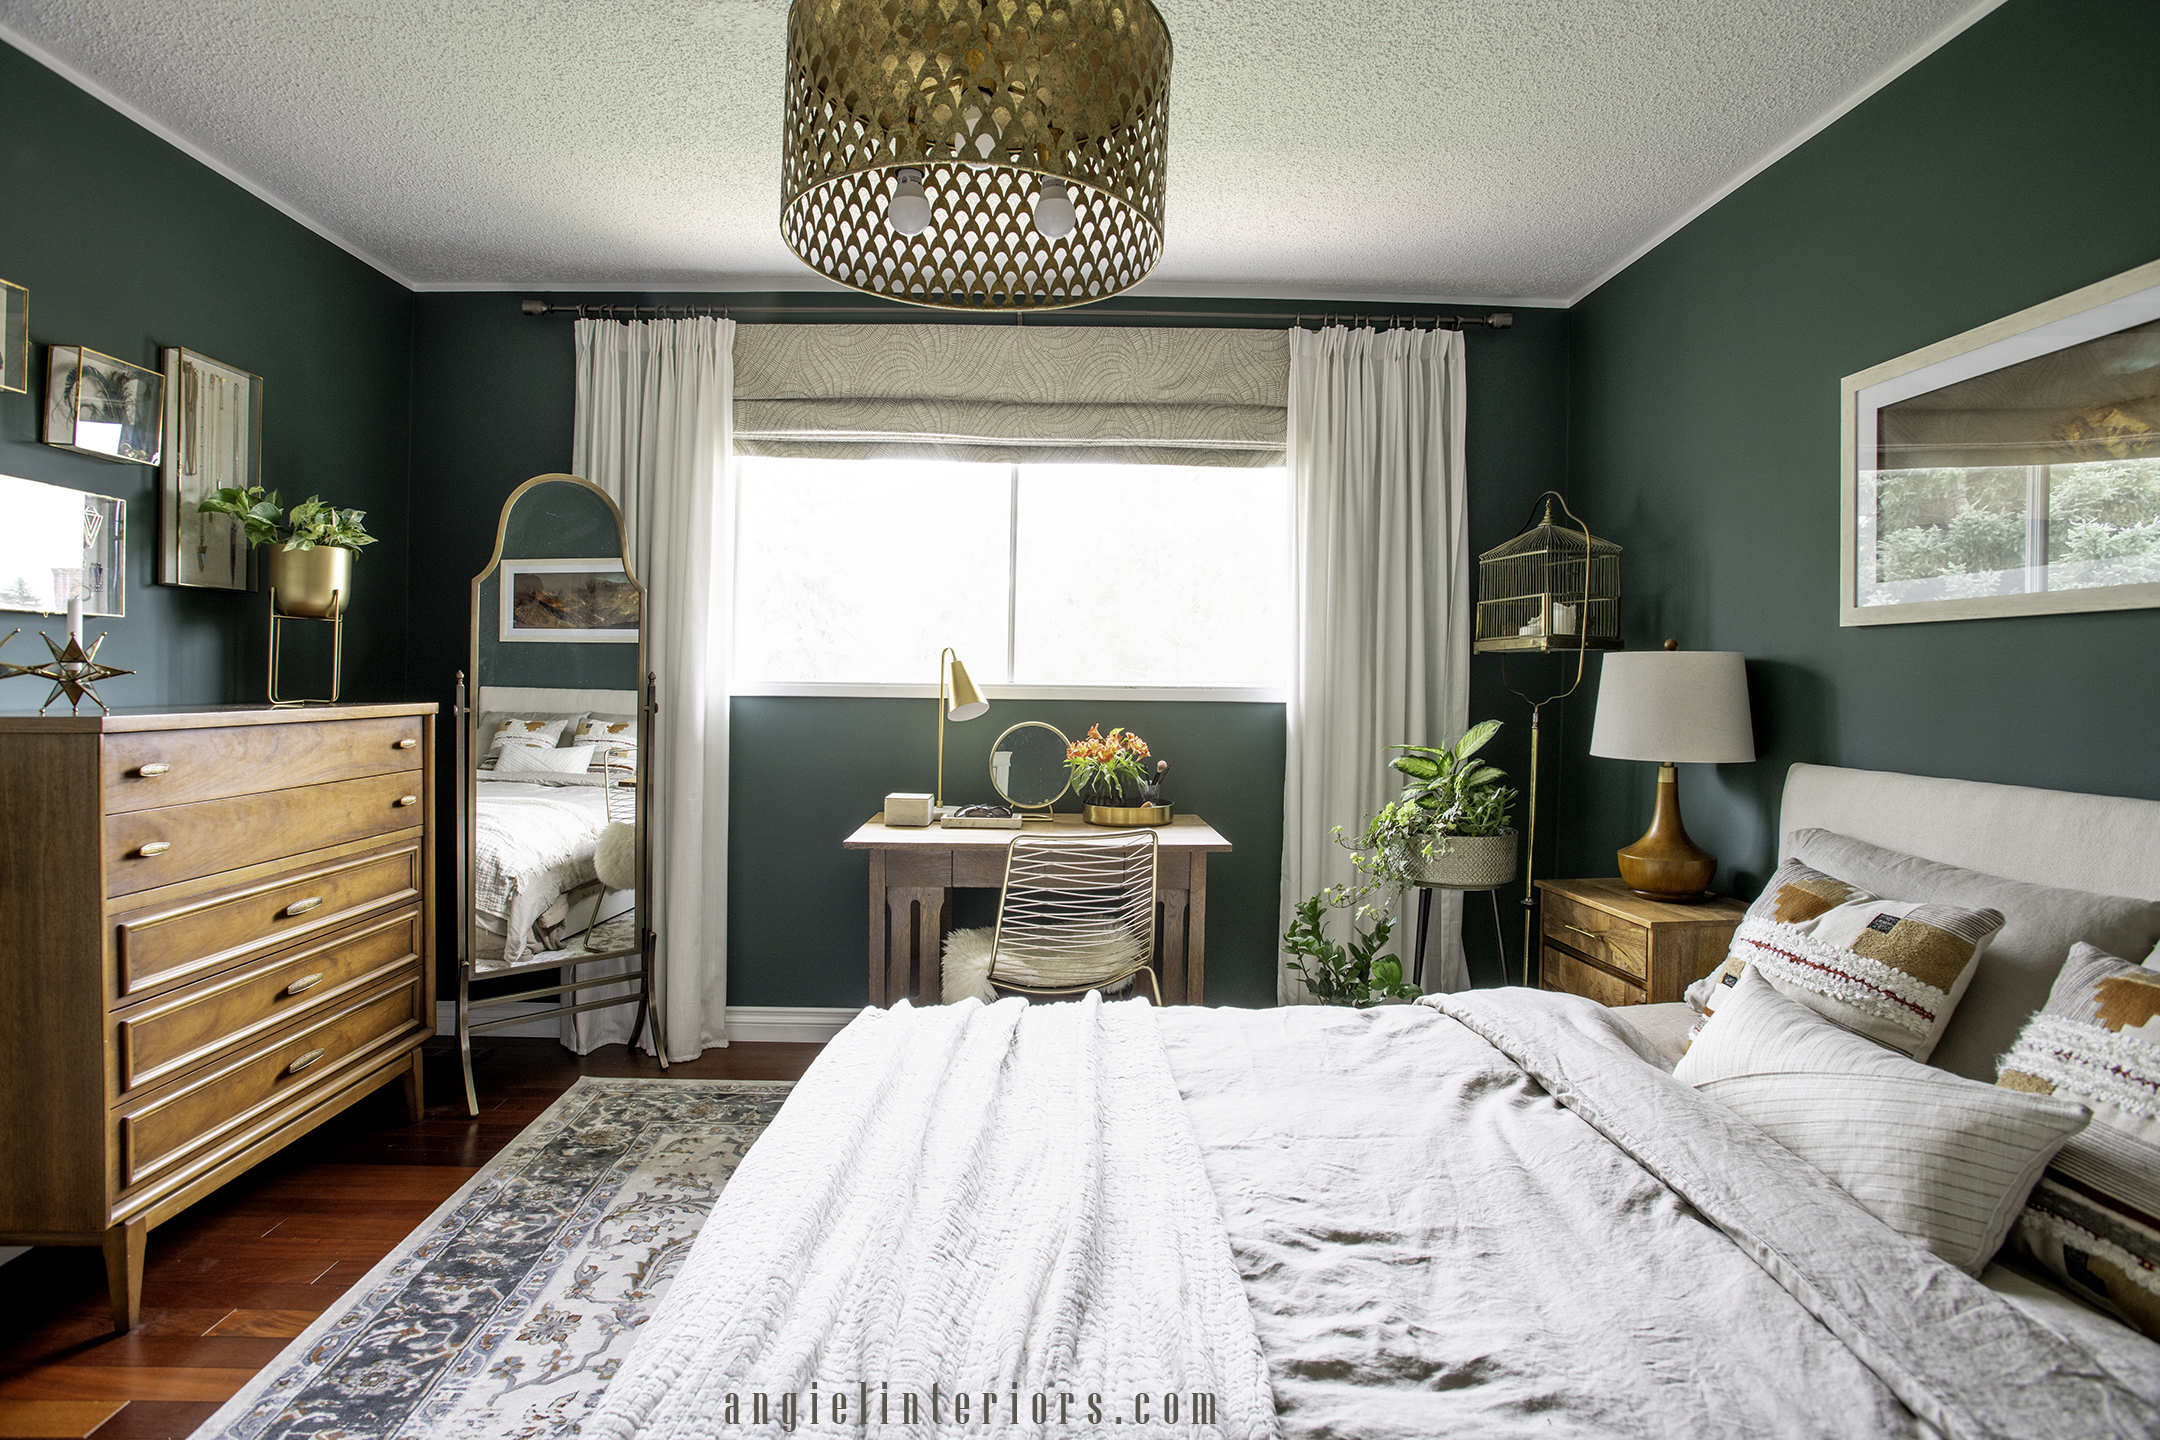 roman shades combined with pleated curtains on a brass rod in a dark green bedroom with mid century modern dresser, standing mirror, wooden vanity and nightstands